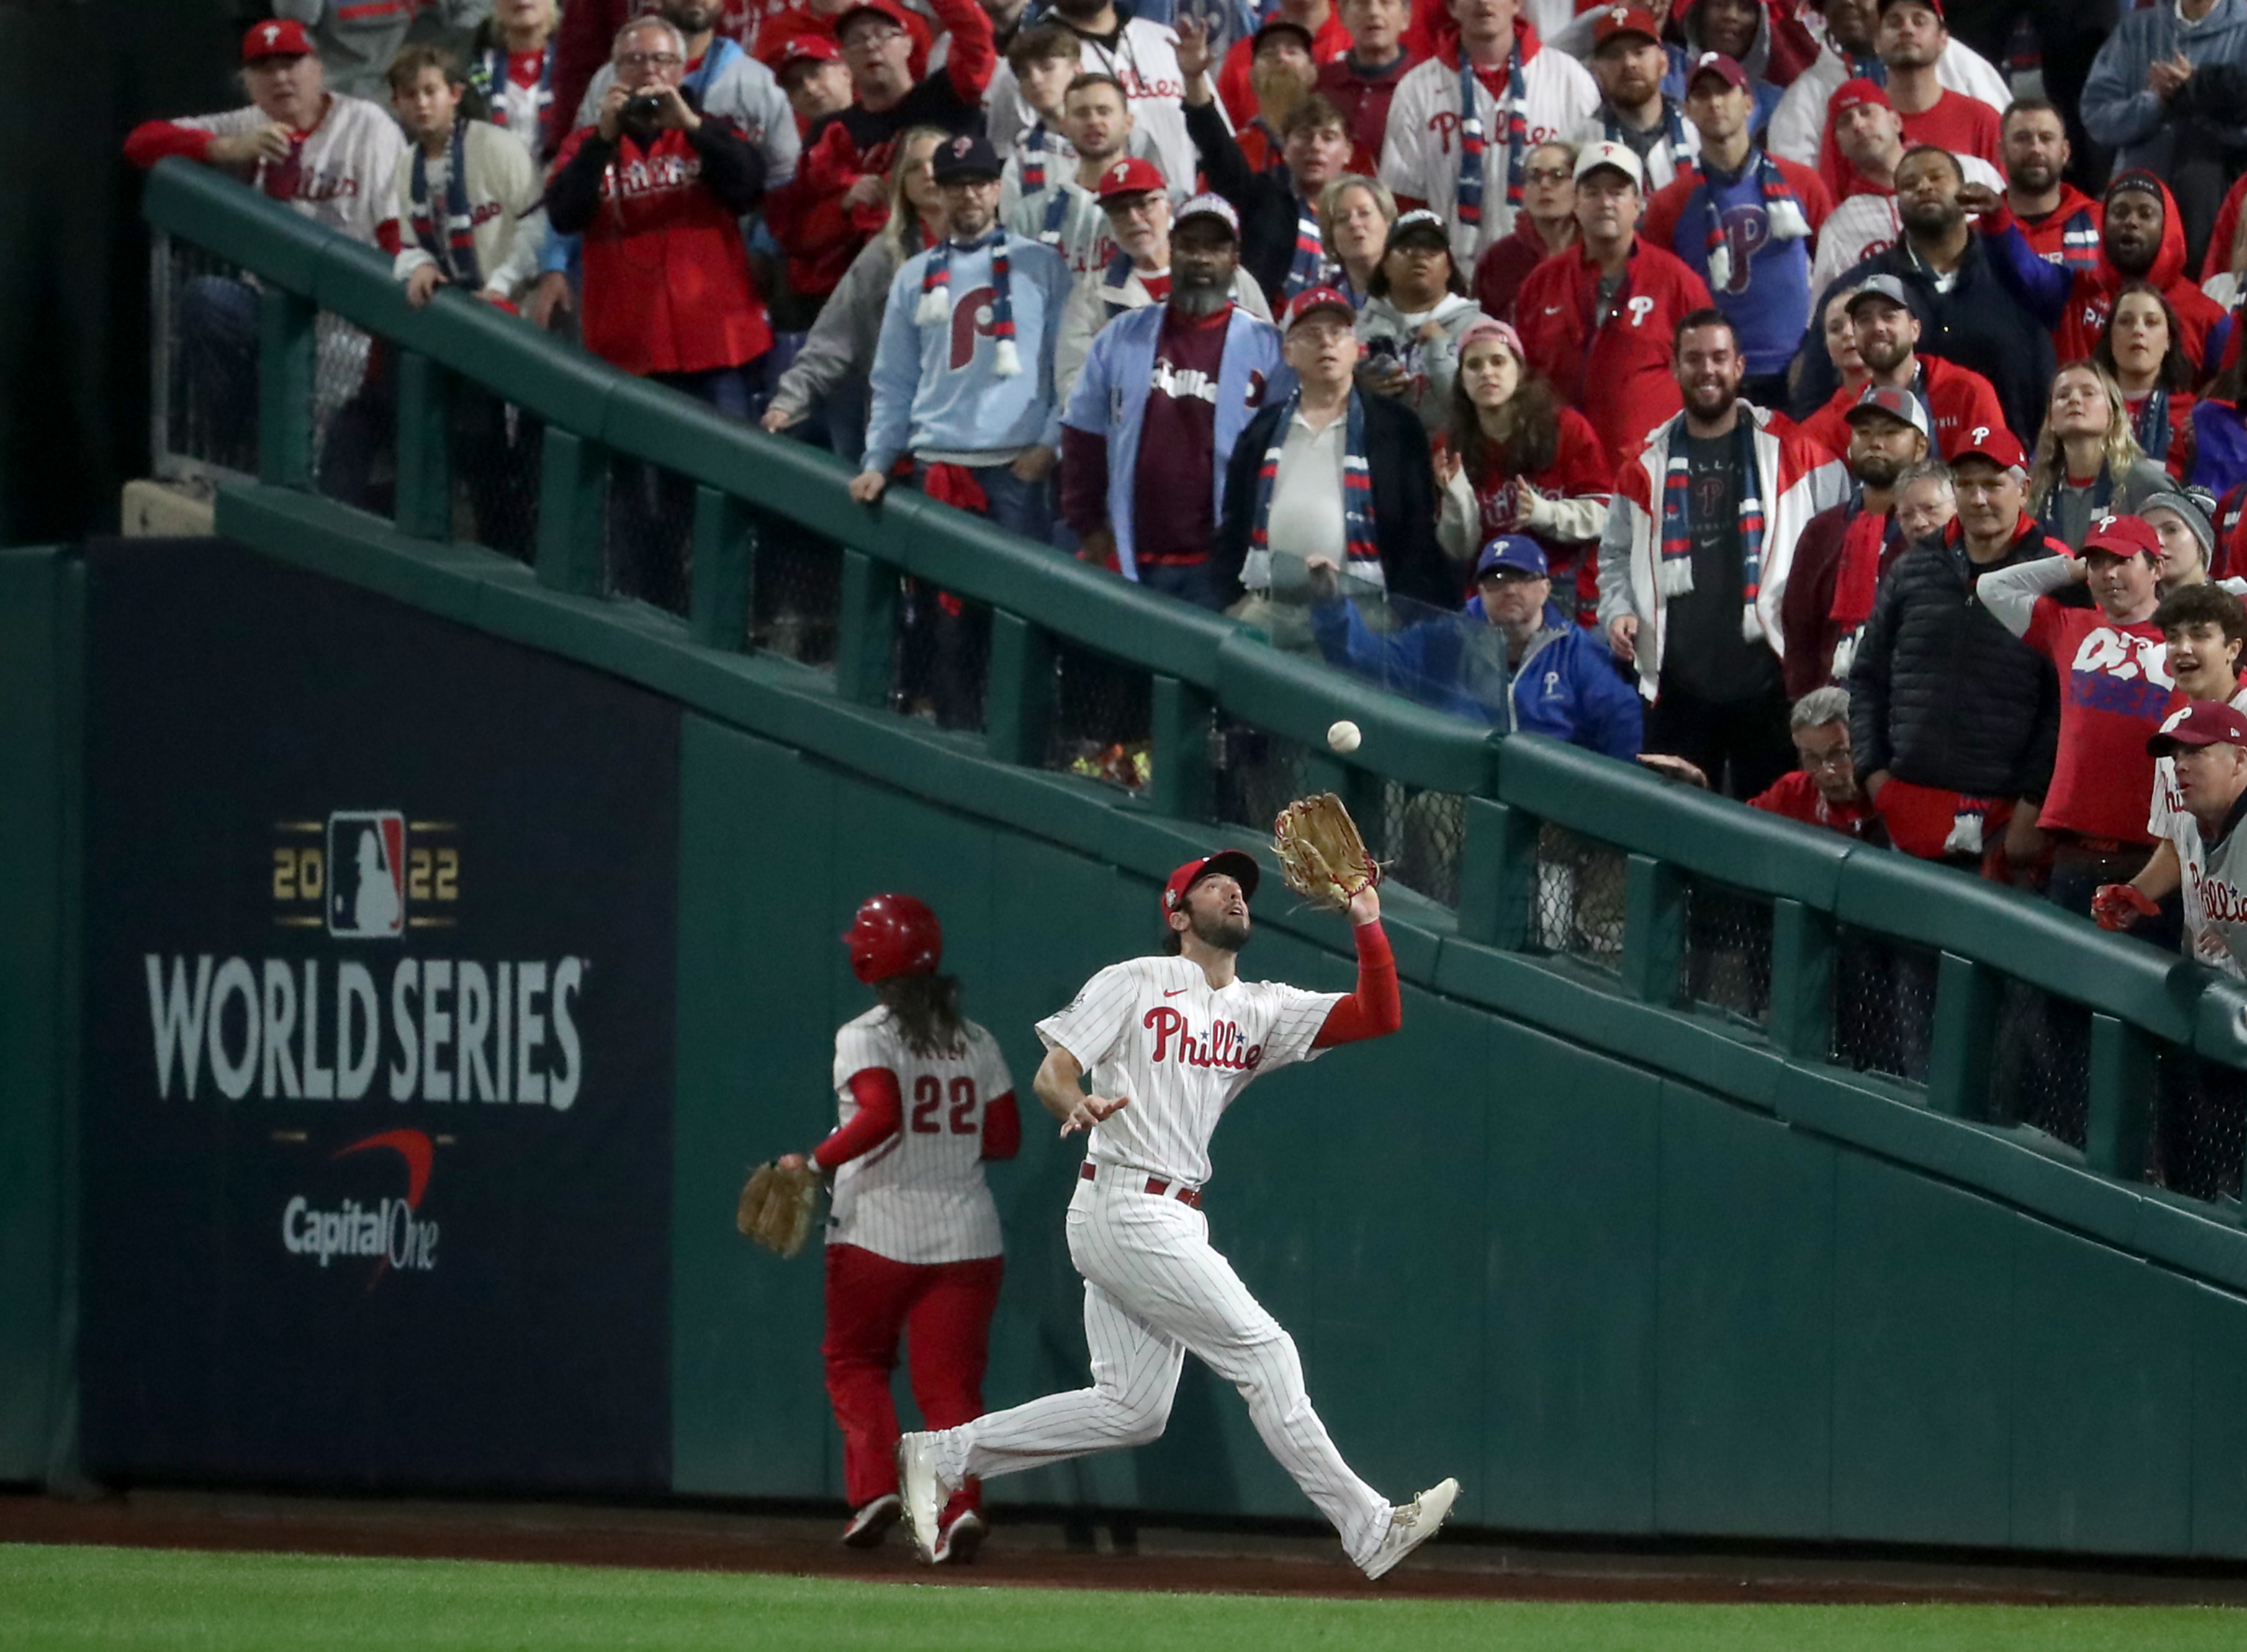 Nick Castellanos (8) of the Philadelphia Phillies makes the catch in the ninth inning during World Series Game 3 against the Houston Astros at Citizens Bank Park, Tuesday, Nov. 1, 2022.